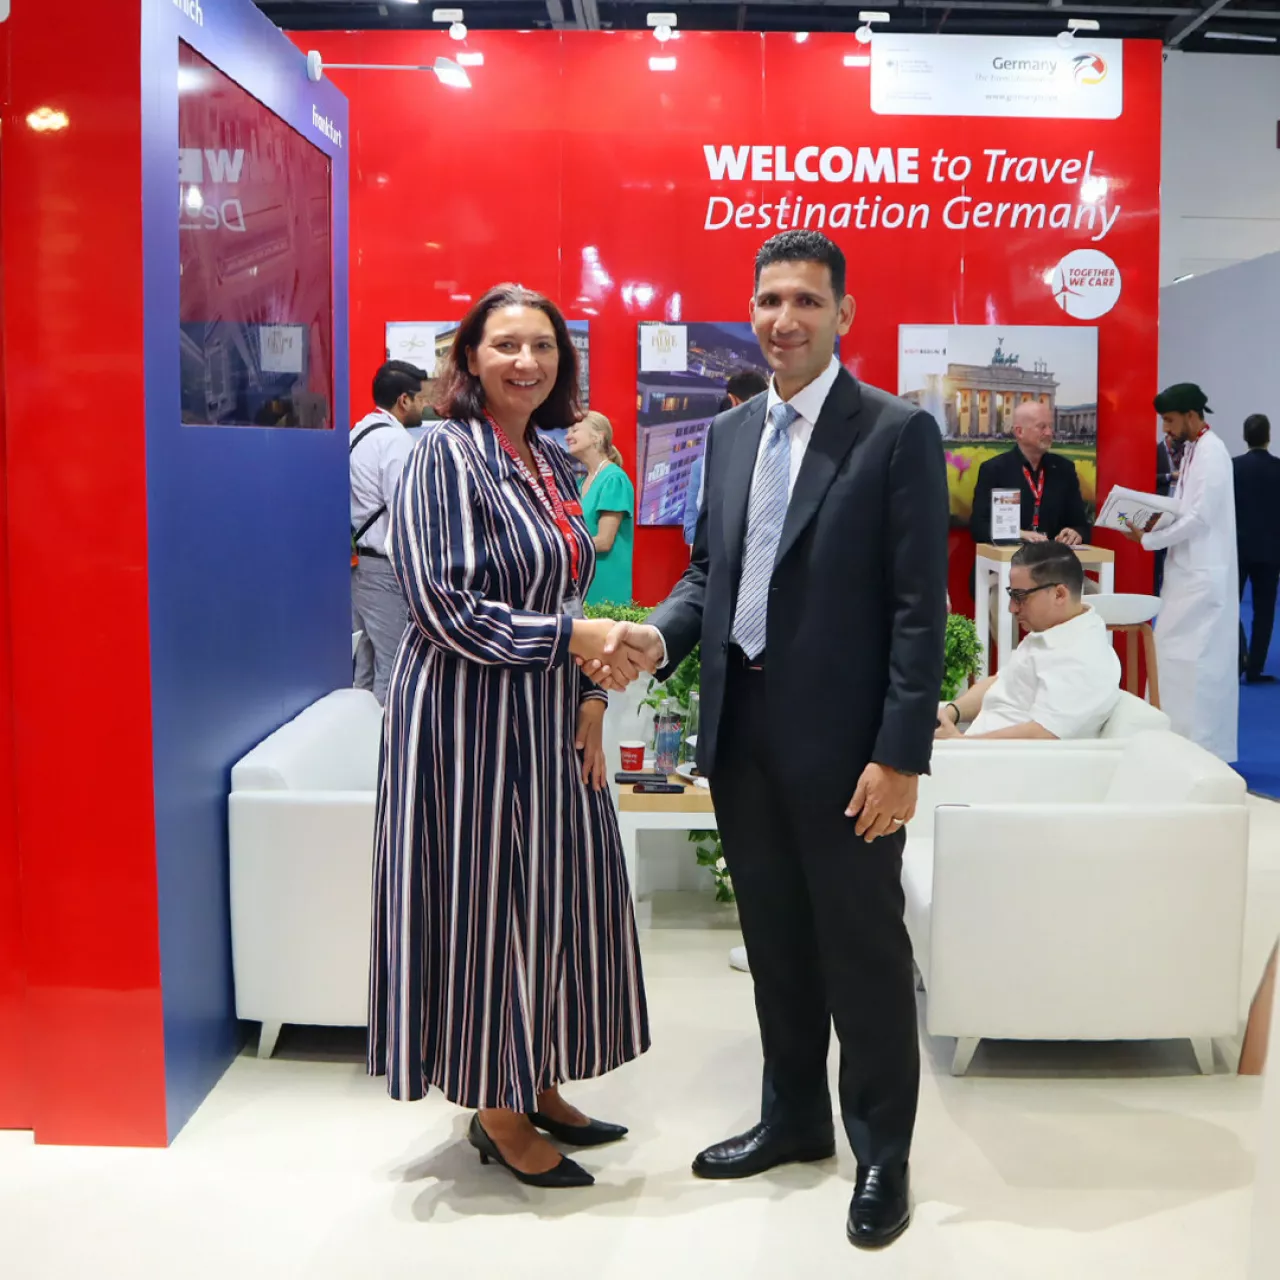 ( from left to right): Yamina Sofo, Director at the German National Tourist Office (GNTO GCC), and Mamoun Hmedan, Chief Commercial officer and Managing Director, MENA and India, Wego img#1